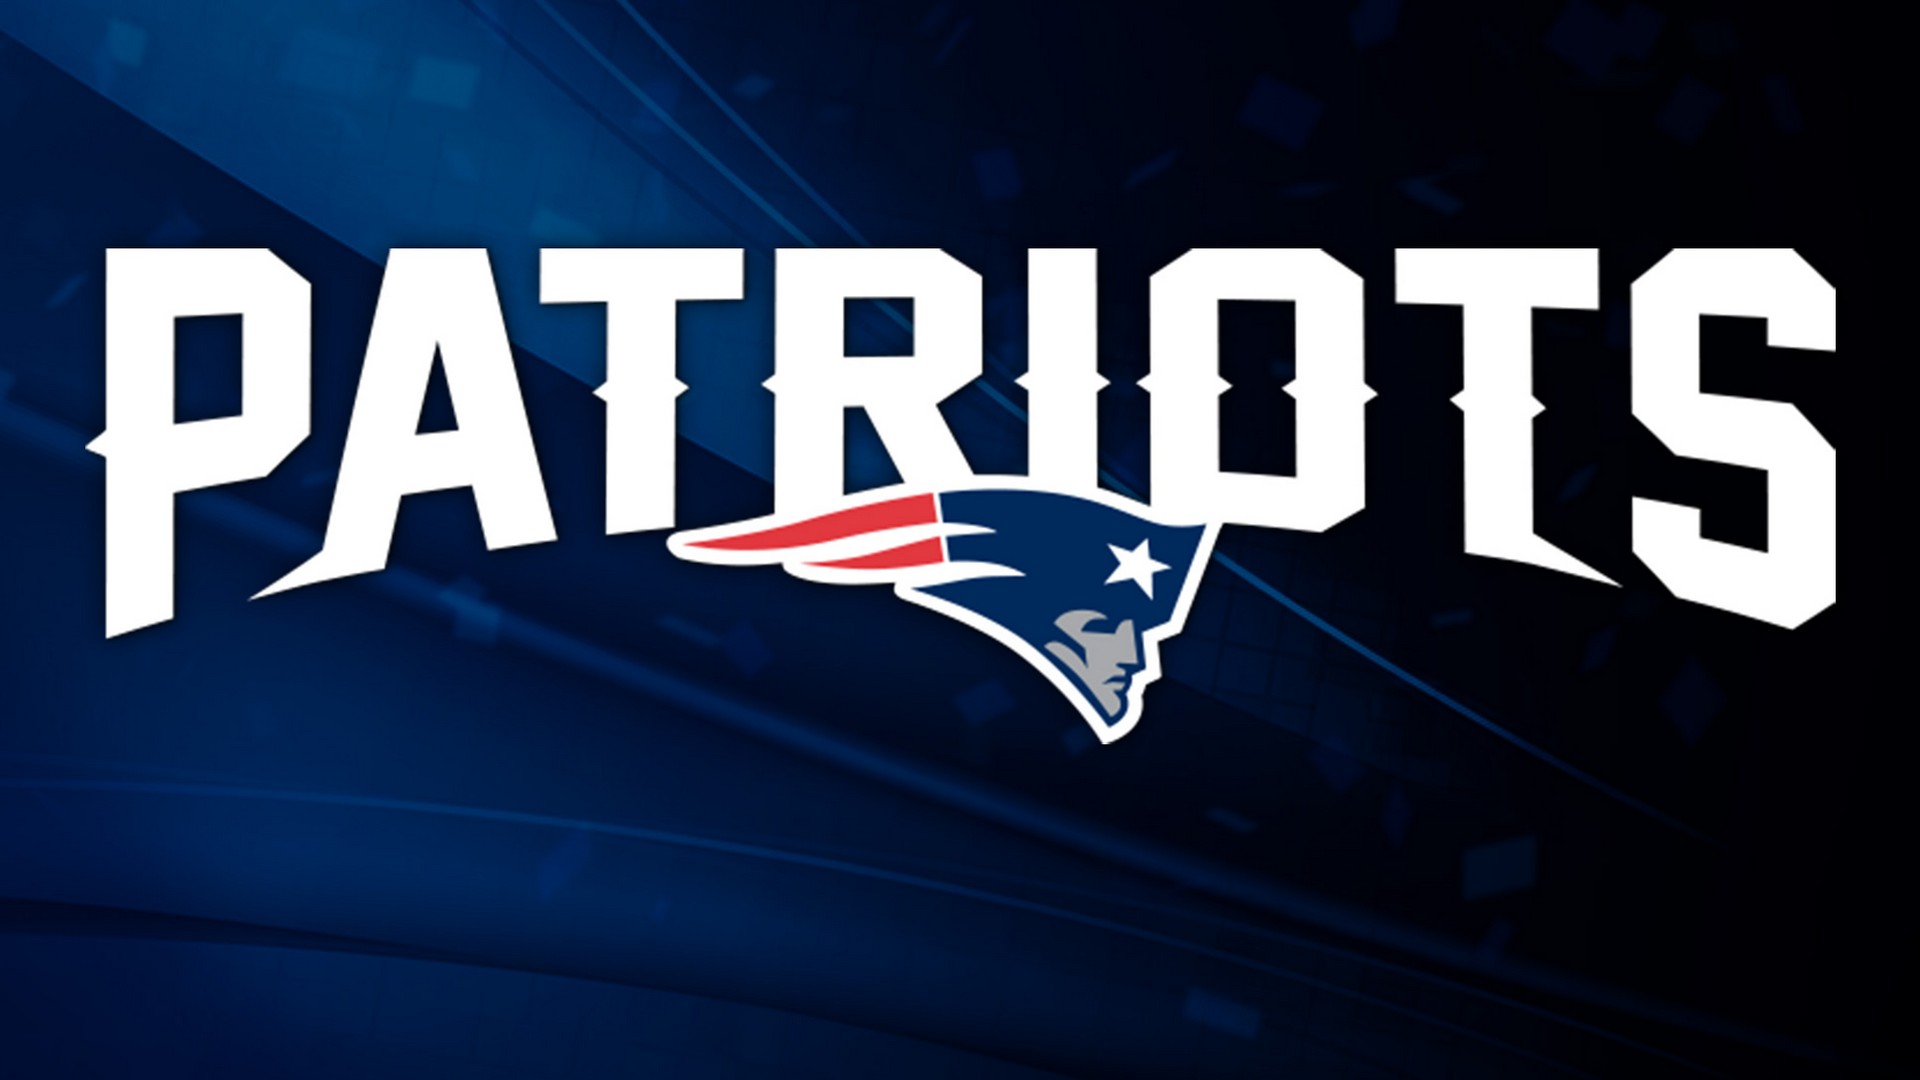 HD Desktop Wallpaper New England Patriots With Resolution 1920X1080 pixel. You can make this wallpaper for your Mac or Windows Desktop Background, iPhone, Android or Tablet and another Smartphone device for free